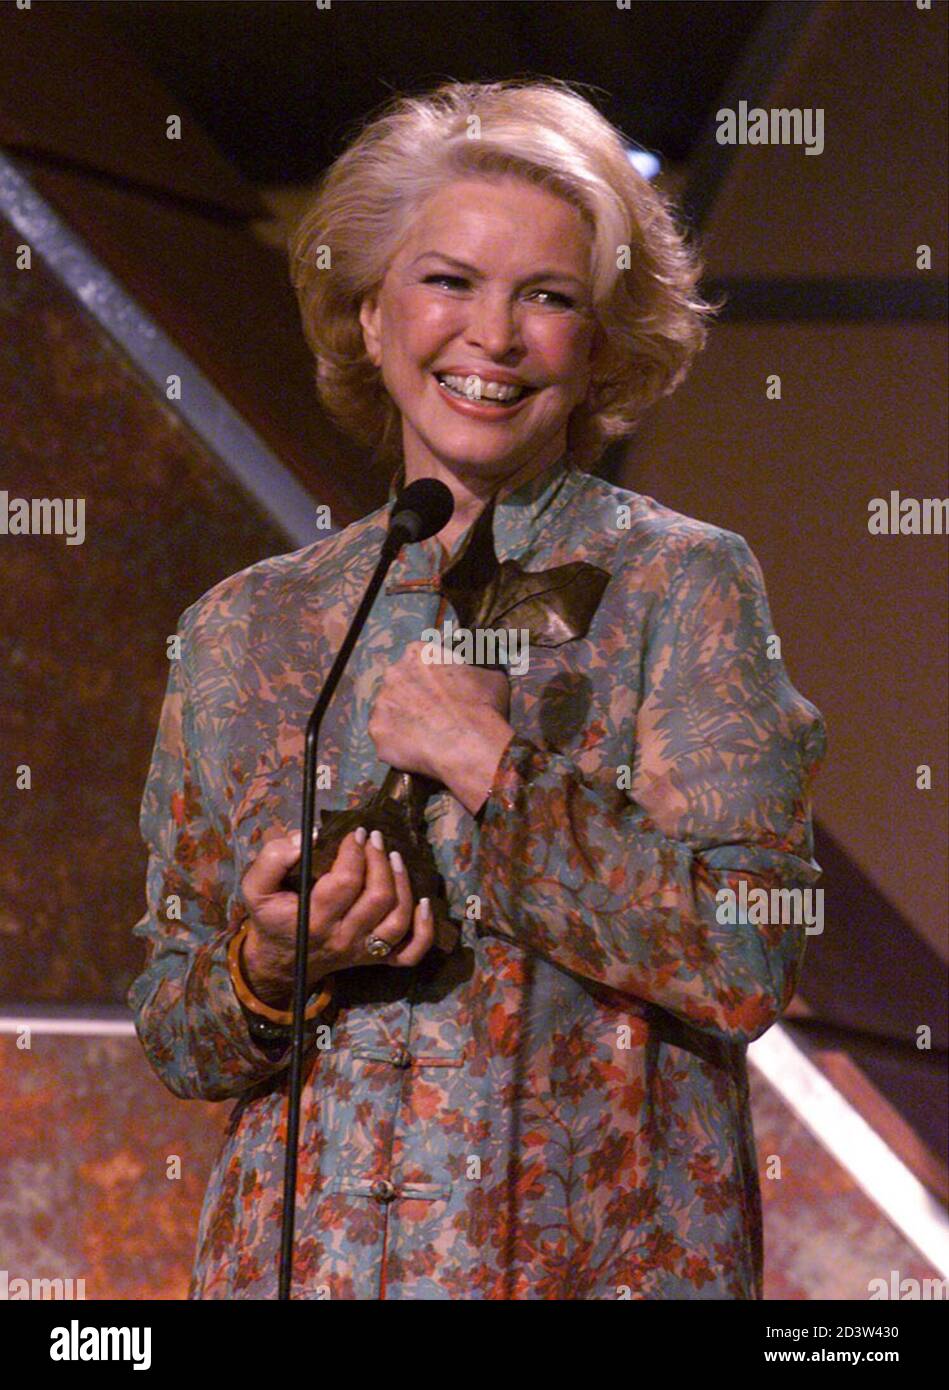 Actress Ellen Burstyn accepts the Best Actress Spirit Award at the 15th  annual Independent Spirit Awards show in Santa Monica, California, March  24, 2001. Burstyn won the award for her role in "